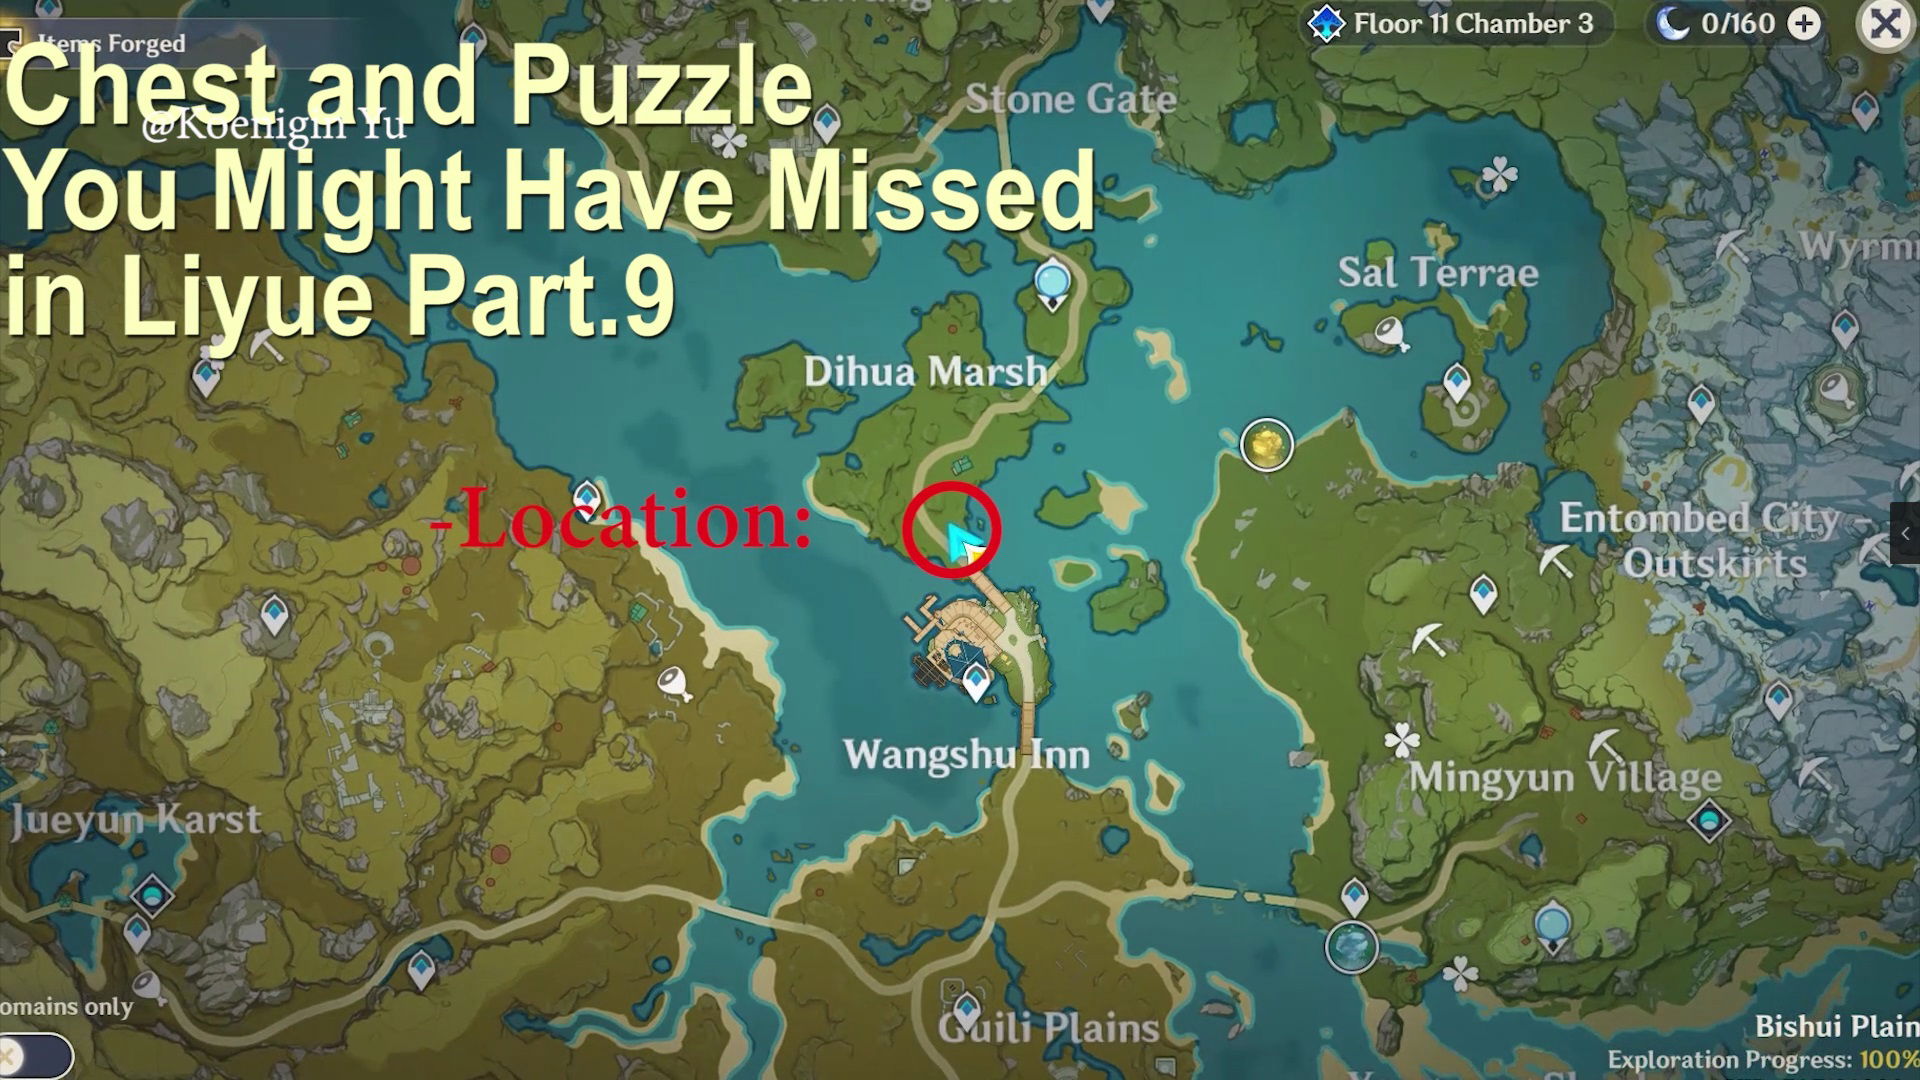 Chest and Puzzle You Might Have Missed in Liyue Part.9